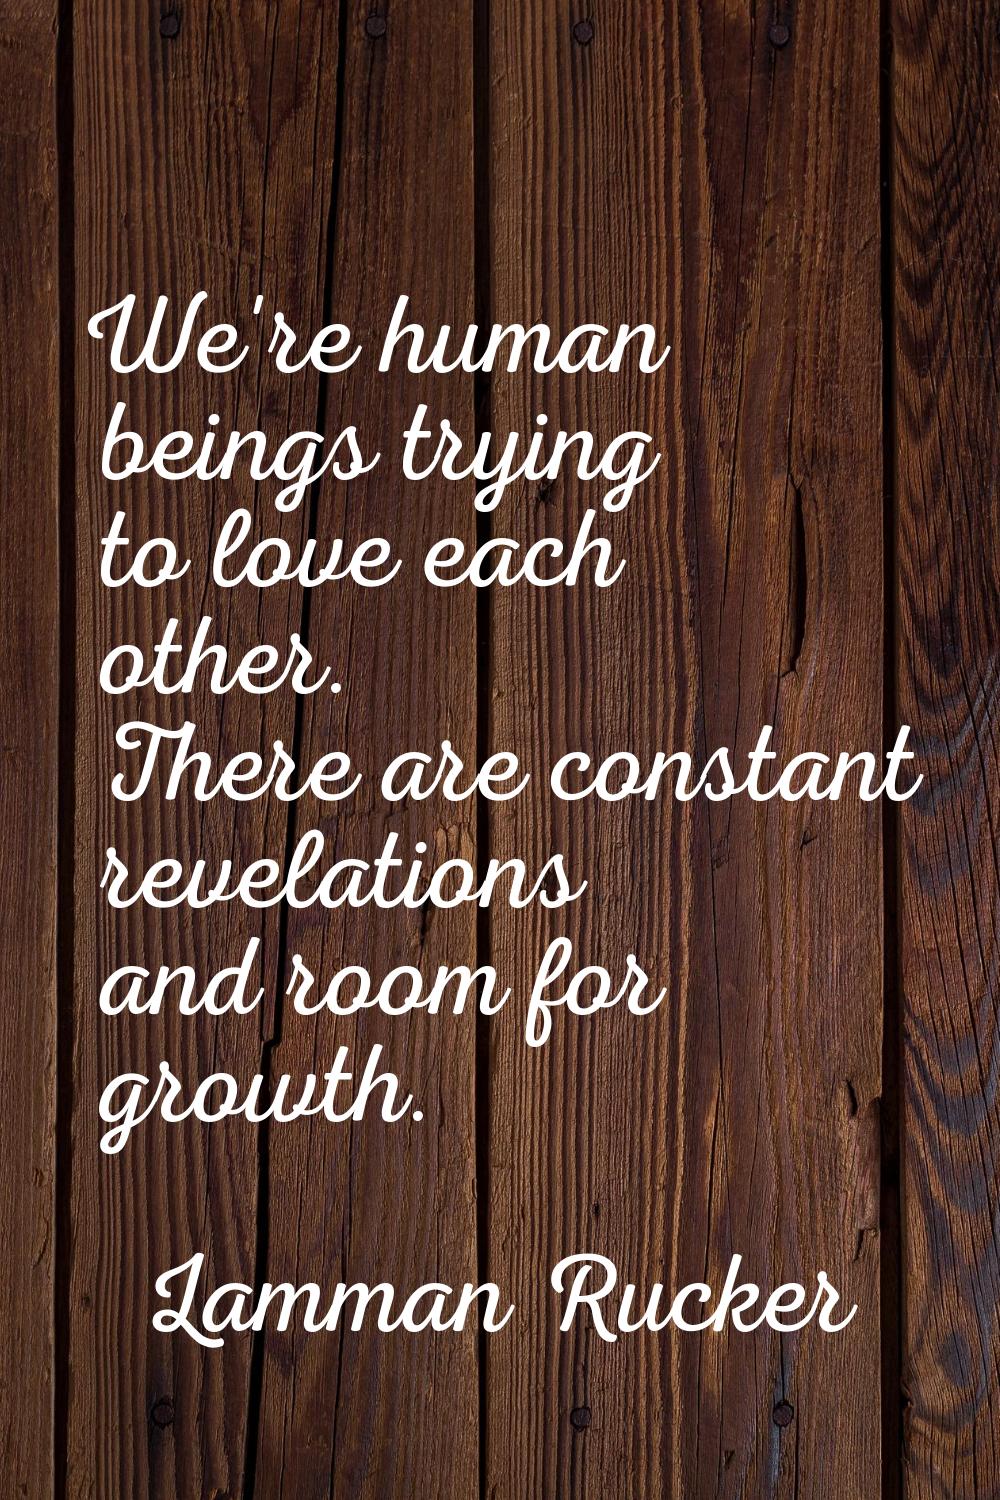 We're human beings trying to love each other. There are constant revelations and room for growth.